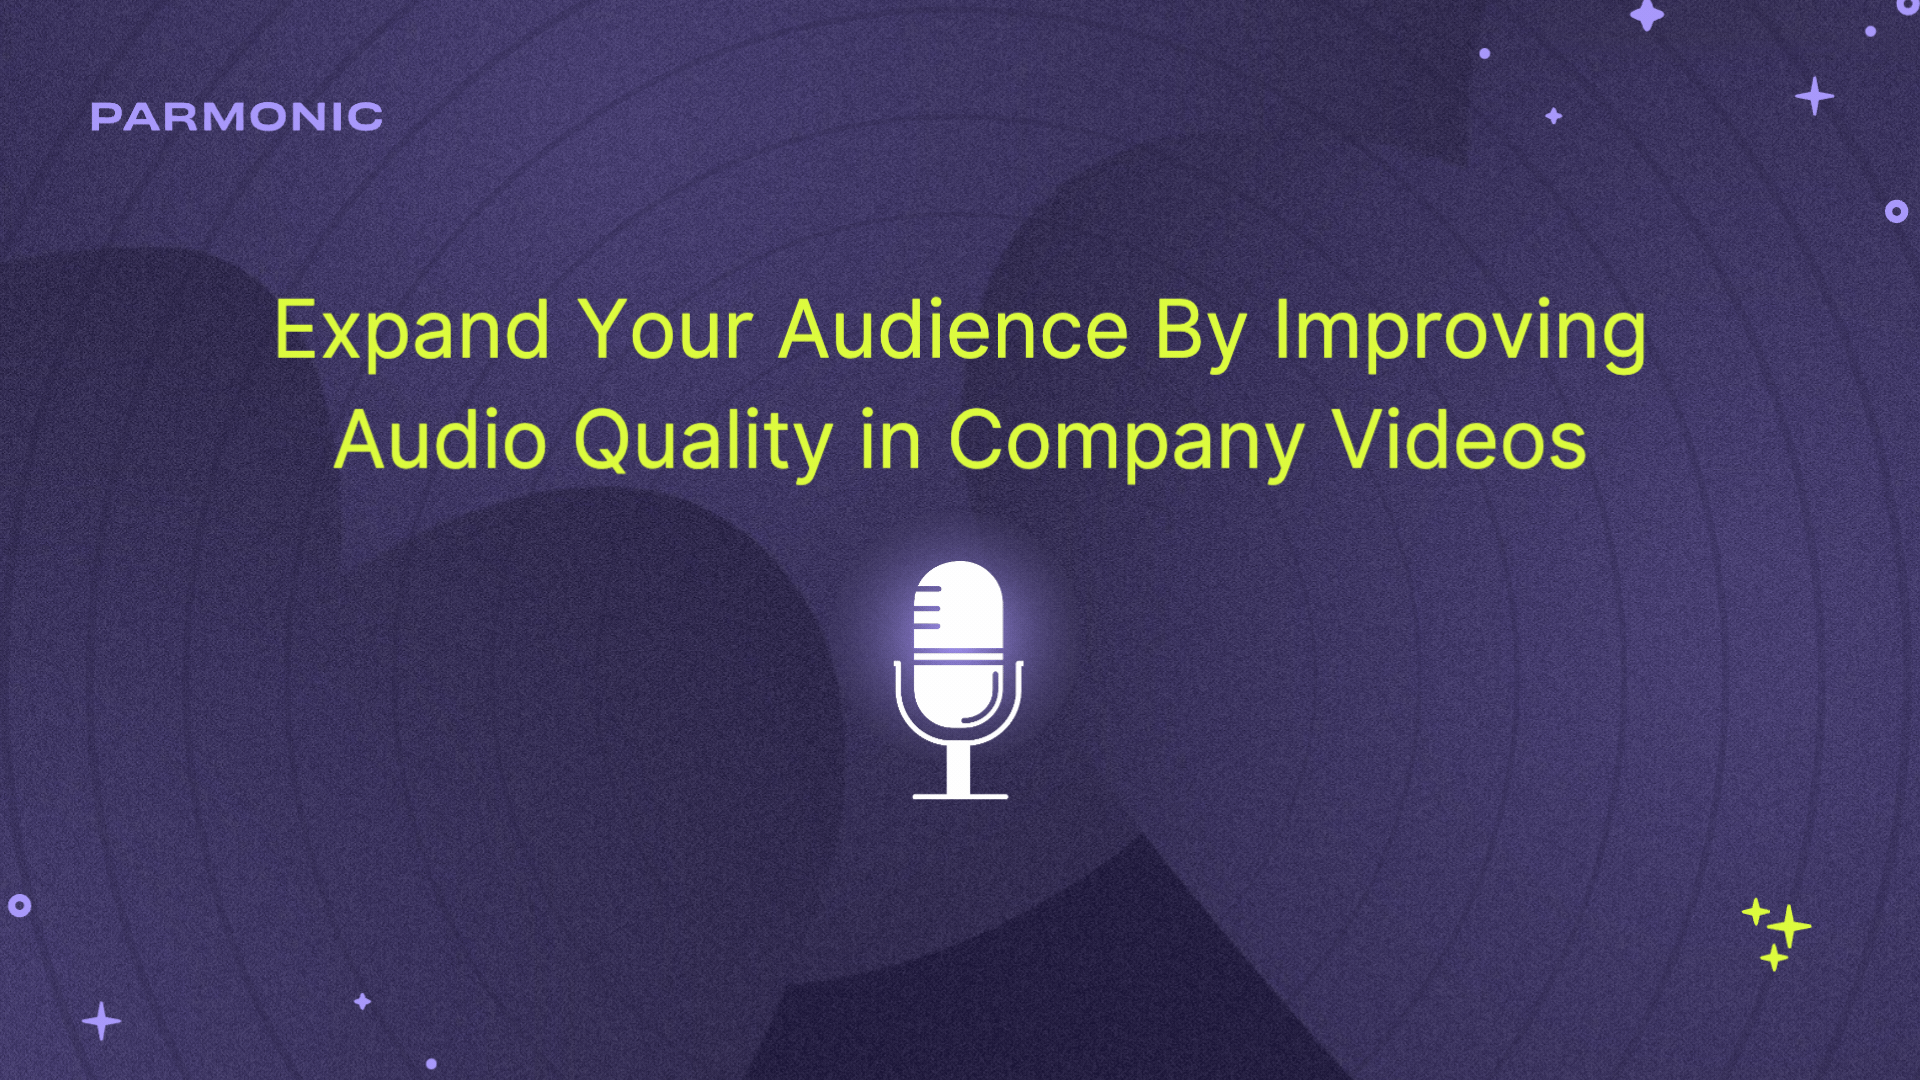 Expand Your Audience By Improving Audio Quality in Company Videos